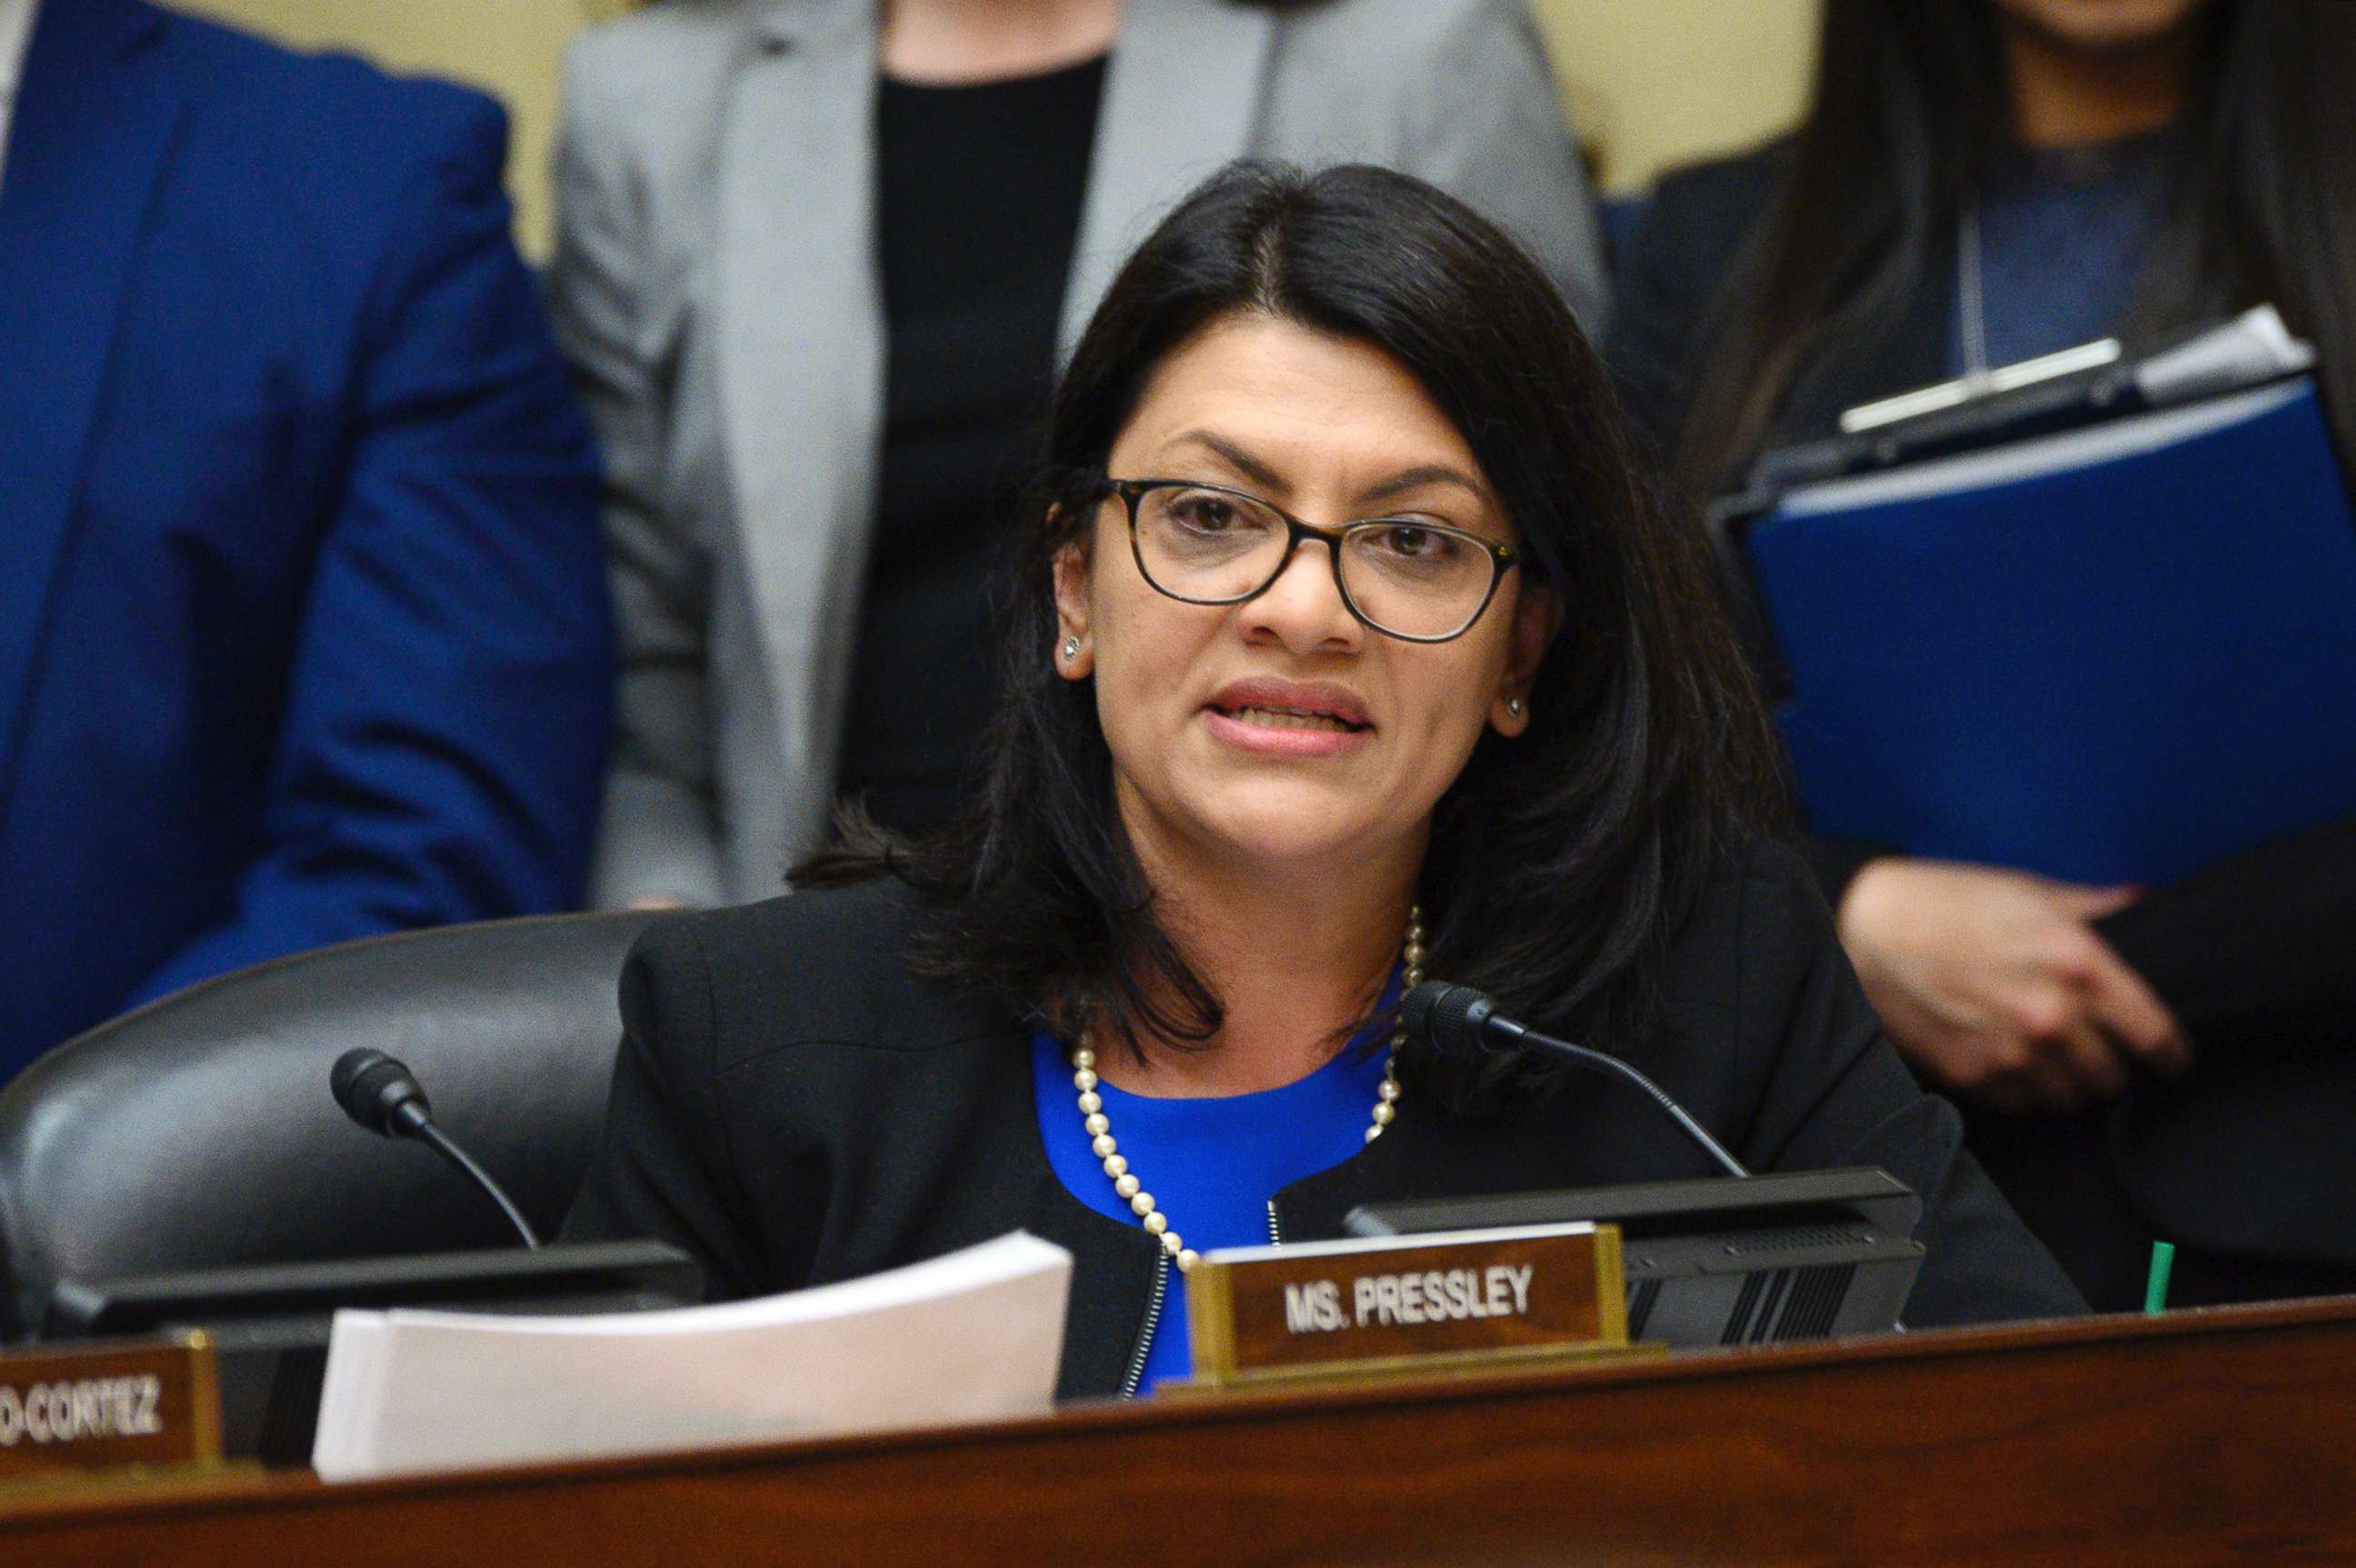 PHOTO: Congresswoman Rashida Tlaib speaks as Michael Cohen, former lawyer for President Donald Trump, testifies before the House Oversight and Reform Committee on Capitol Hill in Washington, D.C., on Feb. 27, 2019.